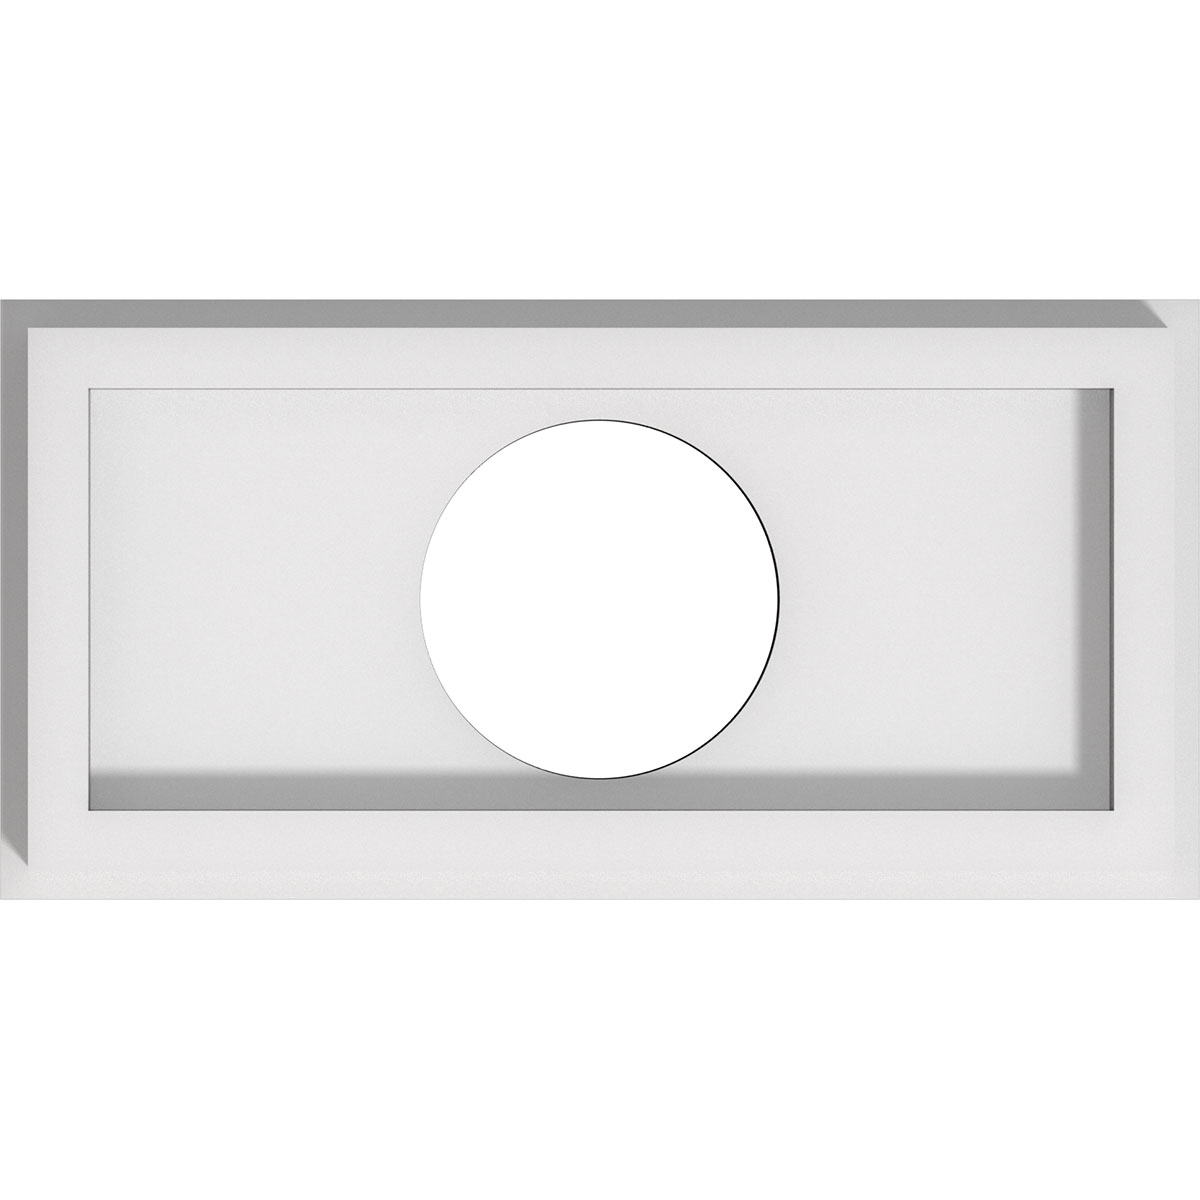 Cmp10x5re-03000 3 In. Id X 3.5 In. Rectangle Architectural Grade Pvc Contemporary Ceiling Medallion